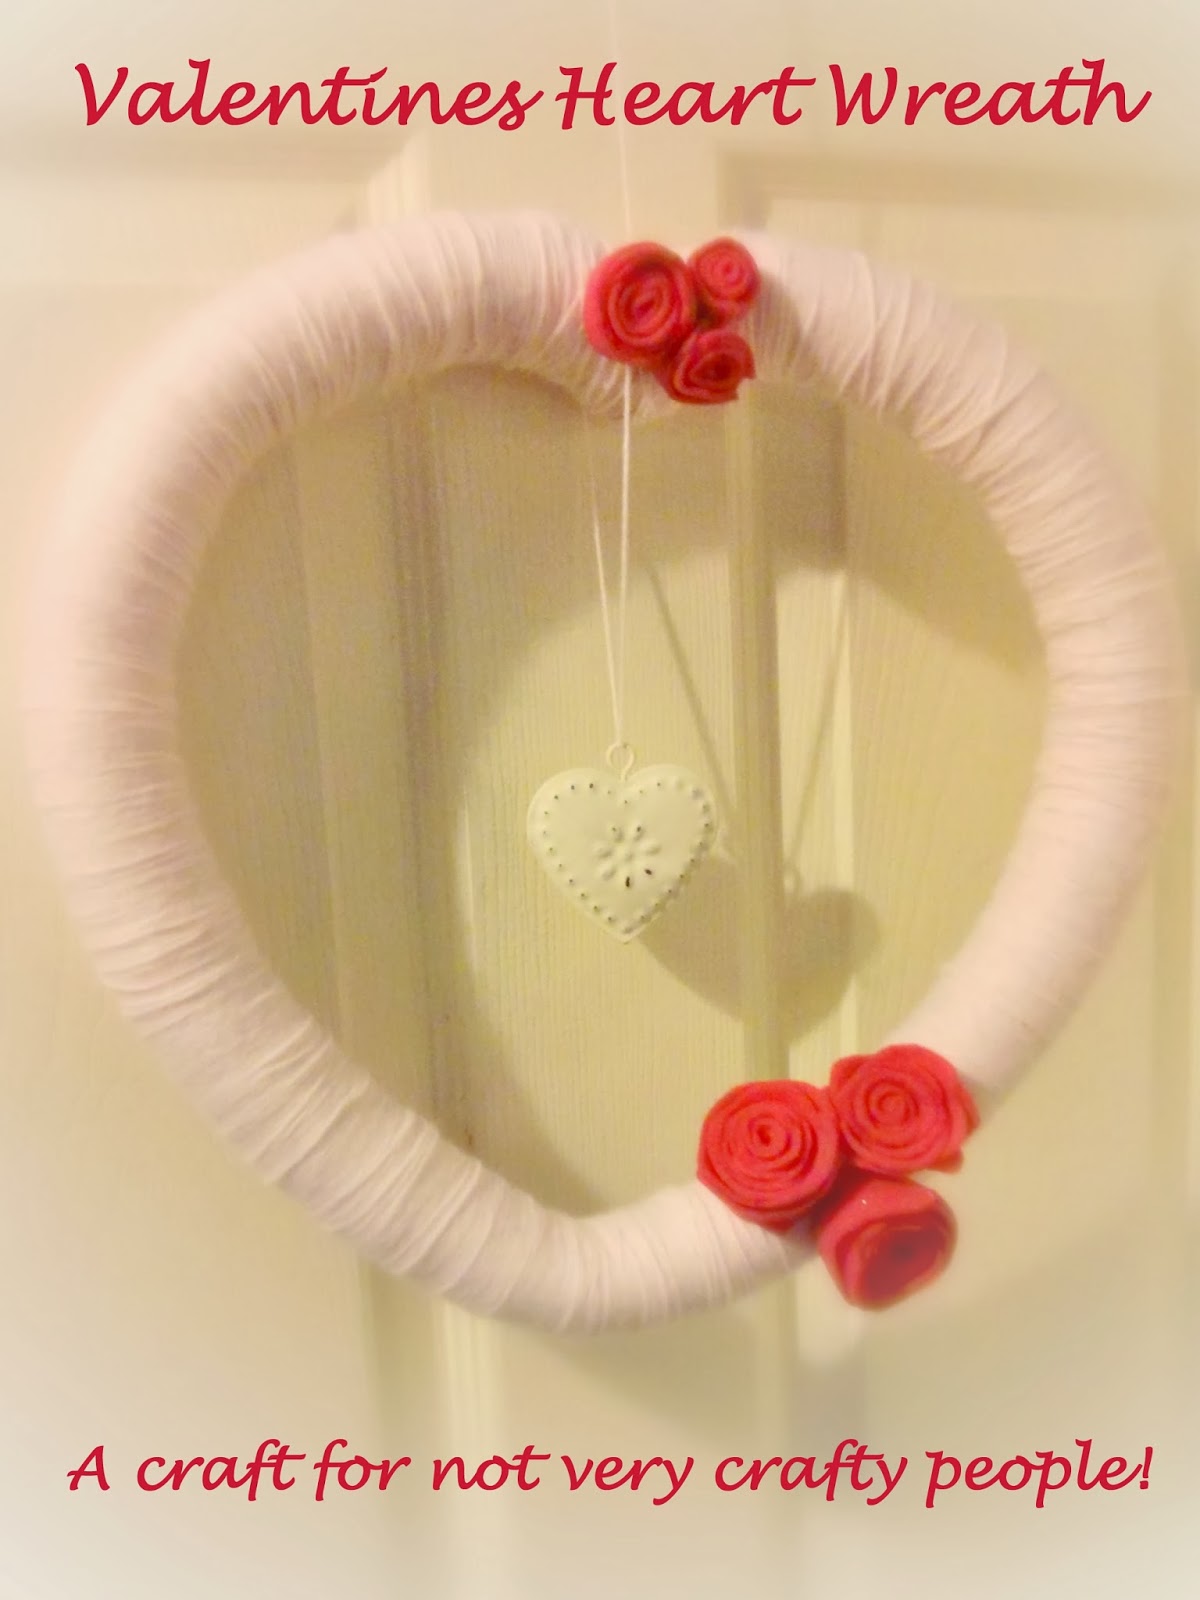 Valentines Heart Wreath Tutorial, a craft for not very crafty people!